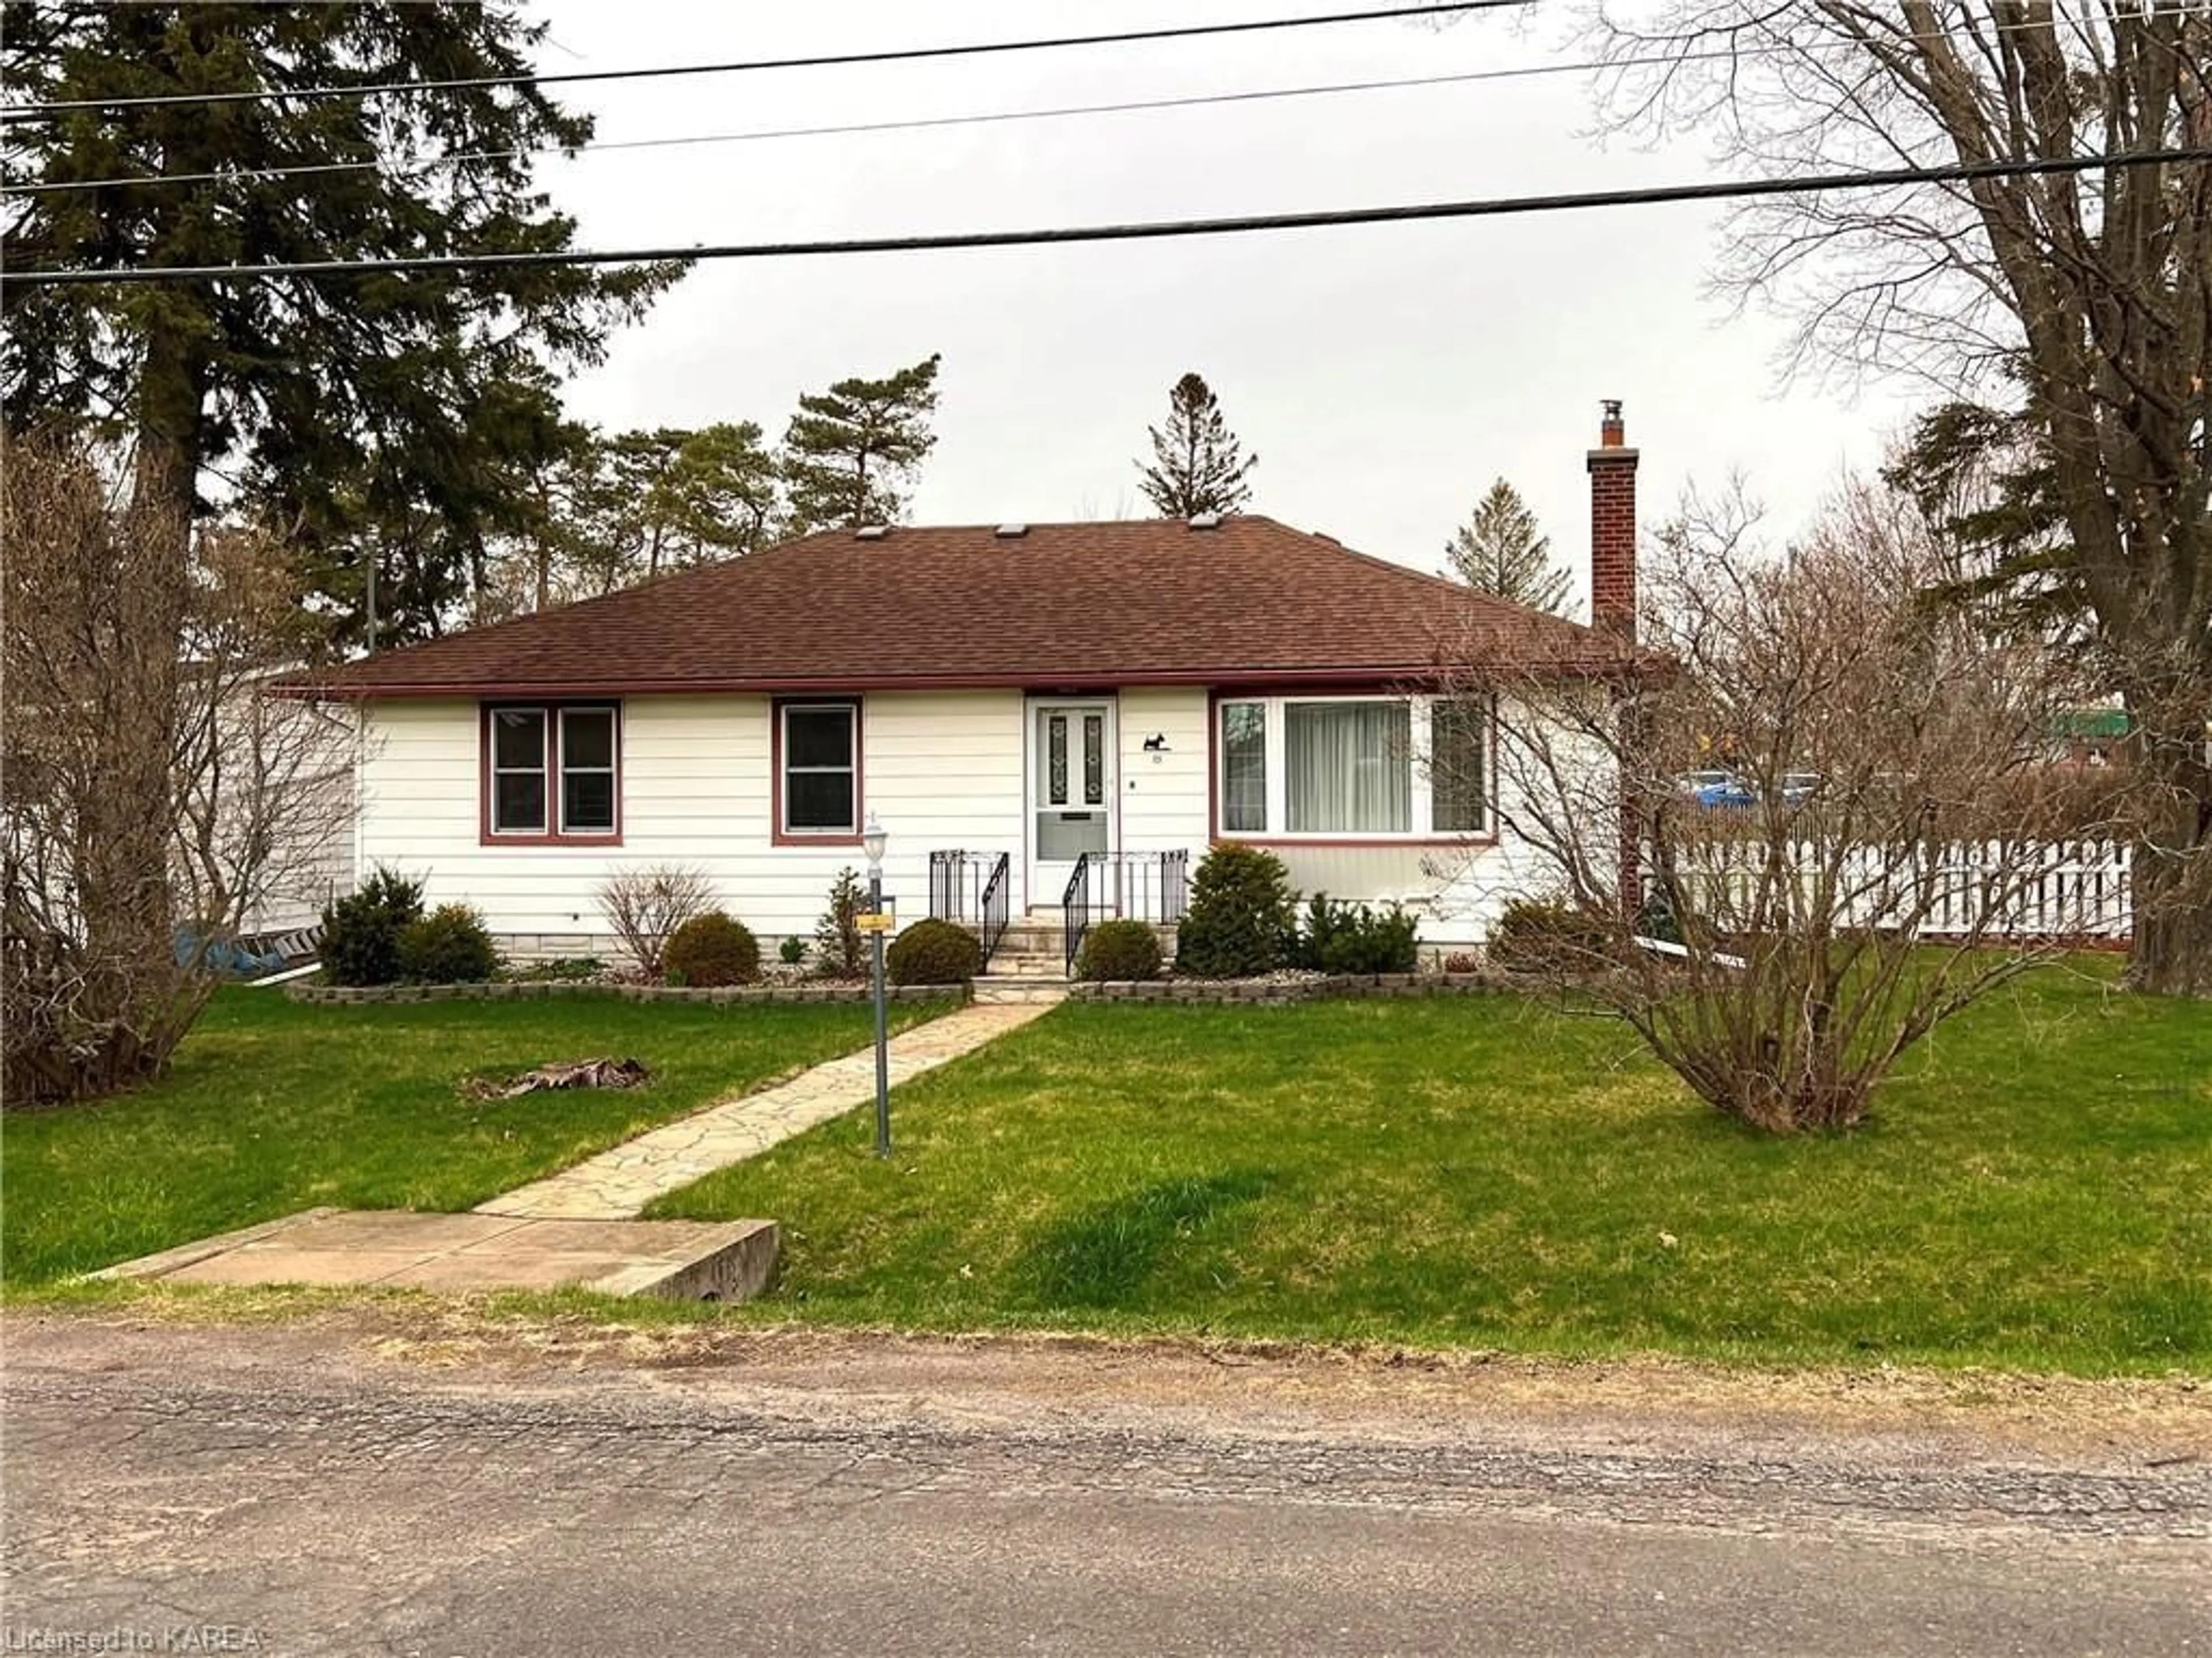 Home with unknown exterior material for 15 Redden St, Kingston Ontario K7M 4K9